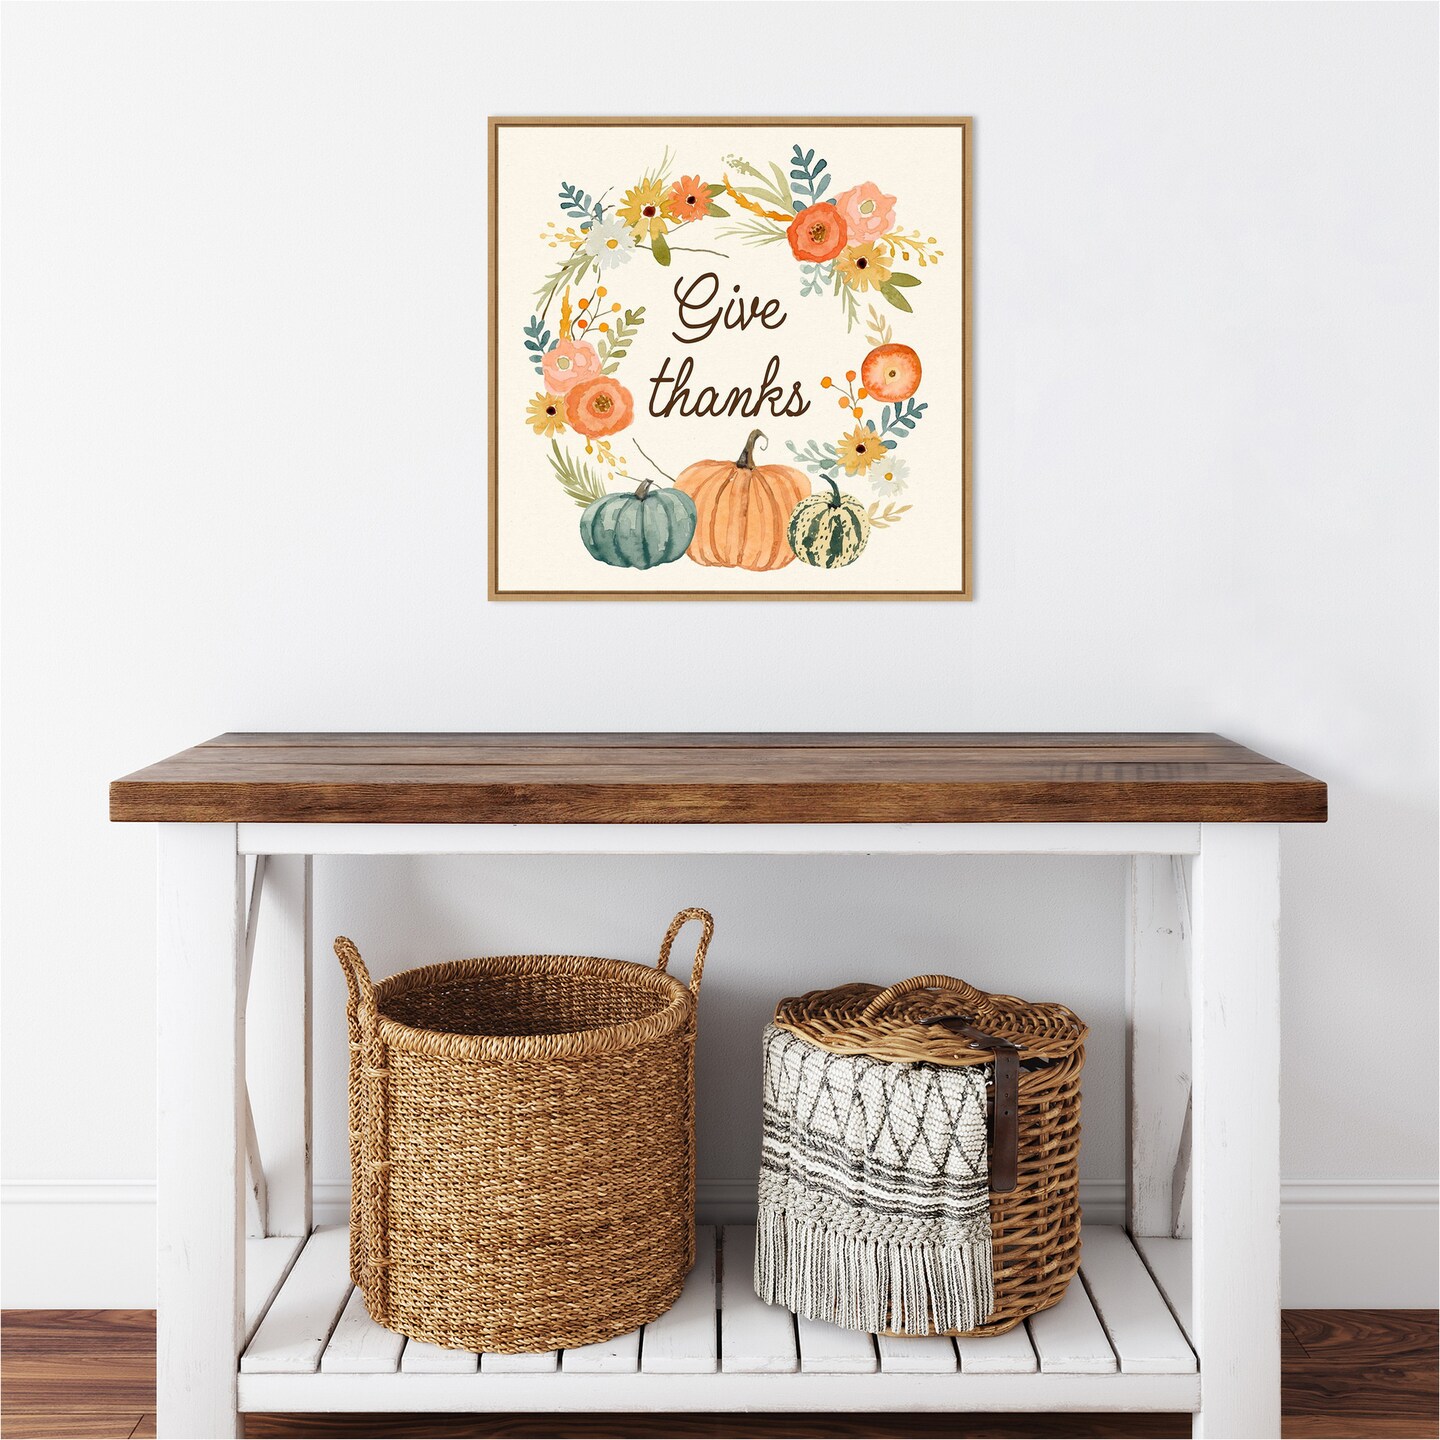 Harvest Home I by Victoria Barnes 22-in. W x 22-in. H. Canvas Wall Art Print Framed in Natural